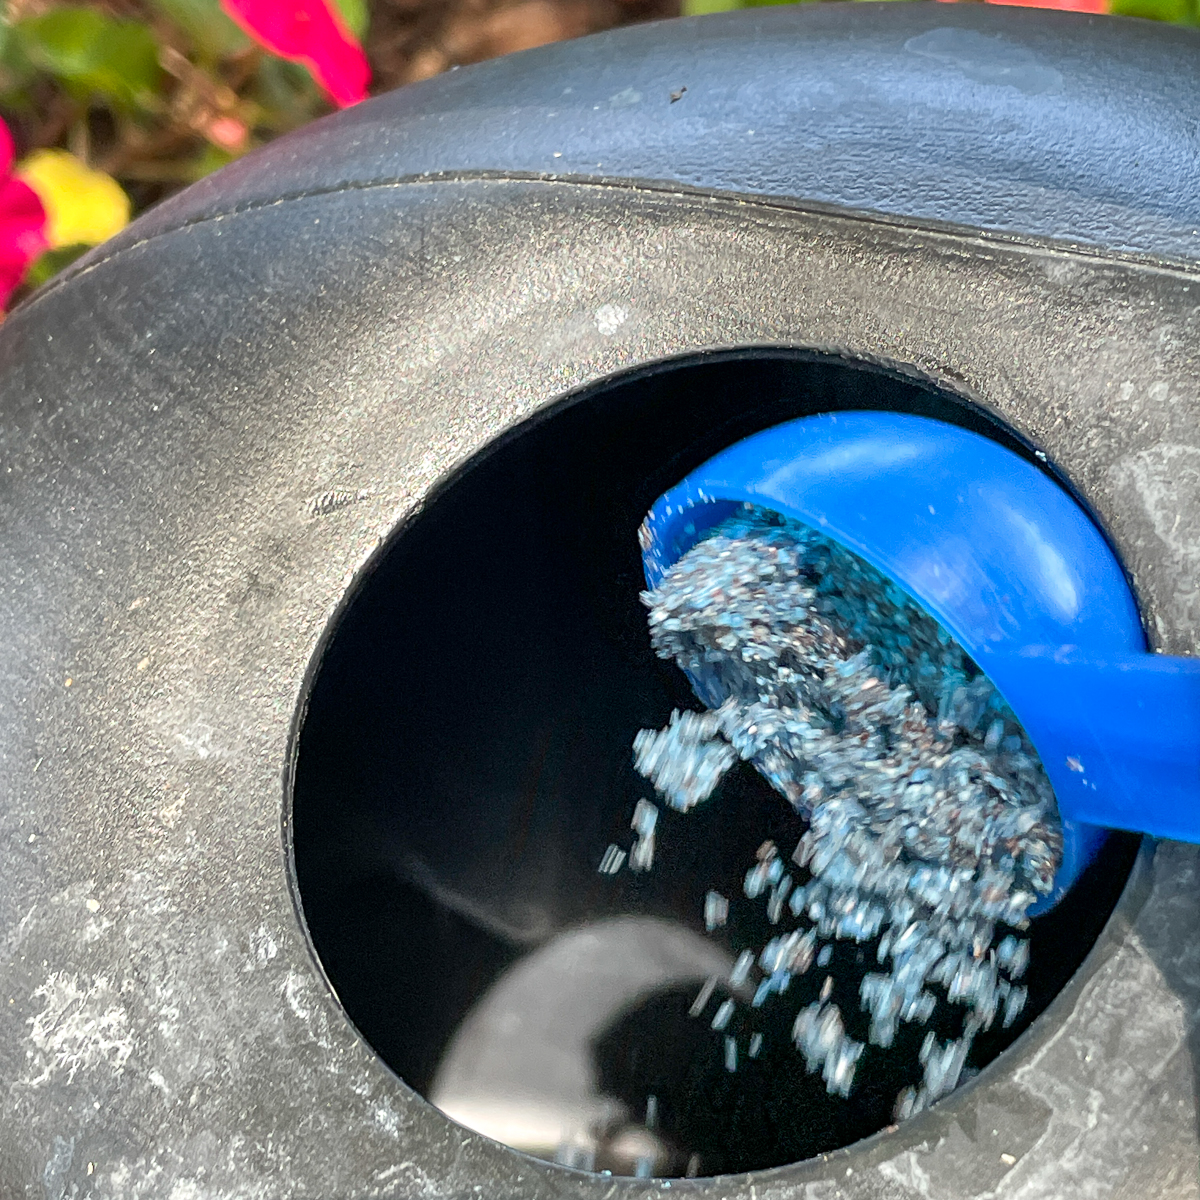 pouring a scoop of water soluble fertilizer into a watering can